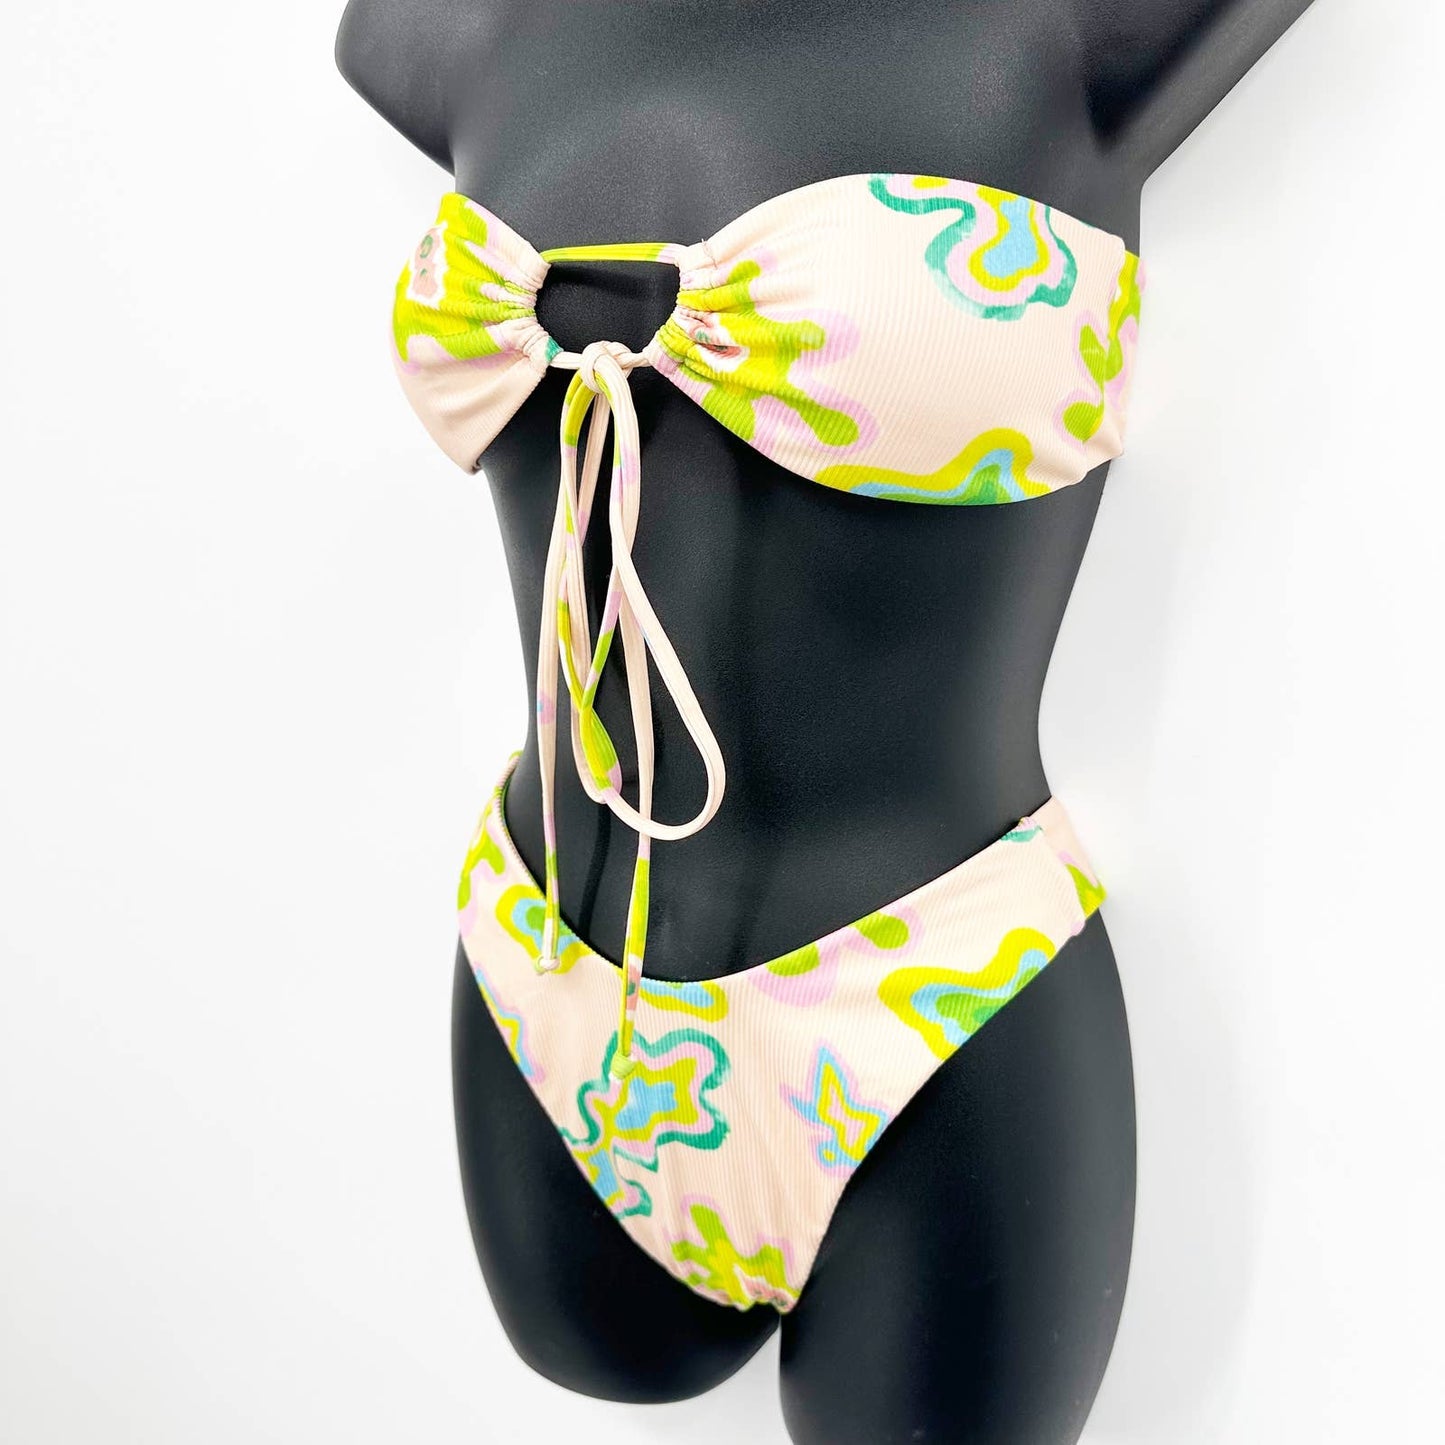 Zaful Ribbed Bandeau Tie Front Cheeky Floral Bikini Swimsuit Pink Green Small